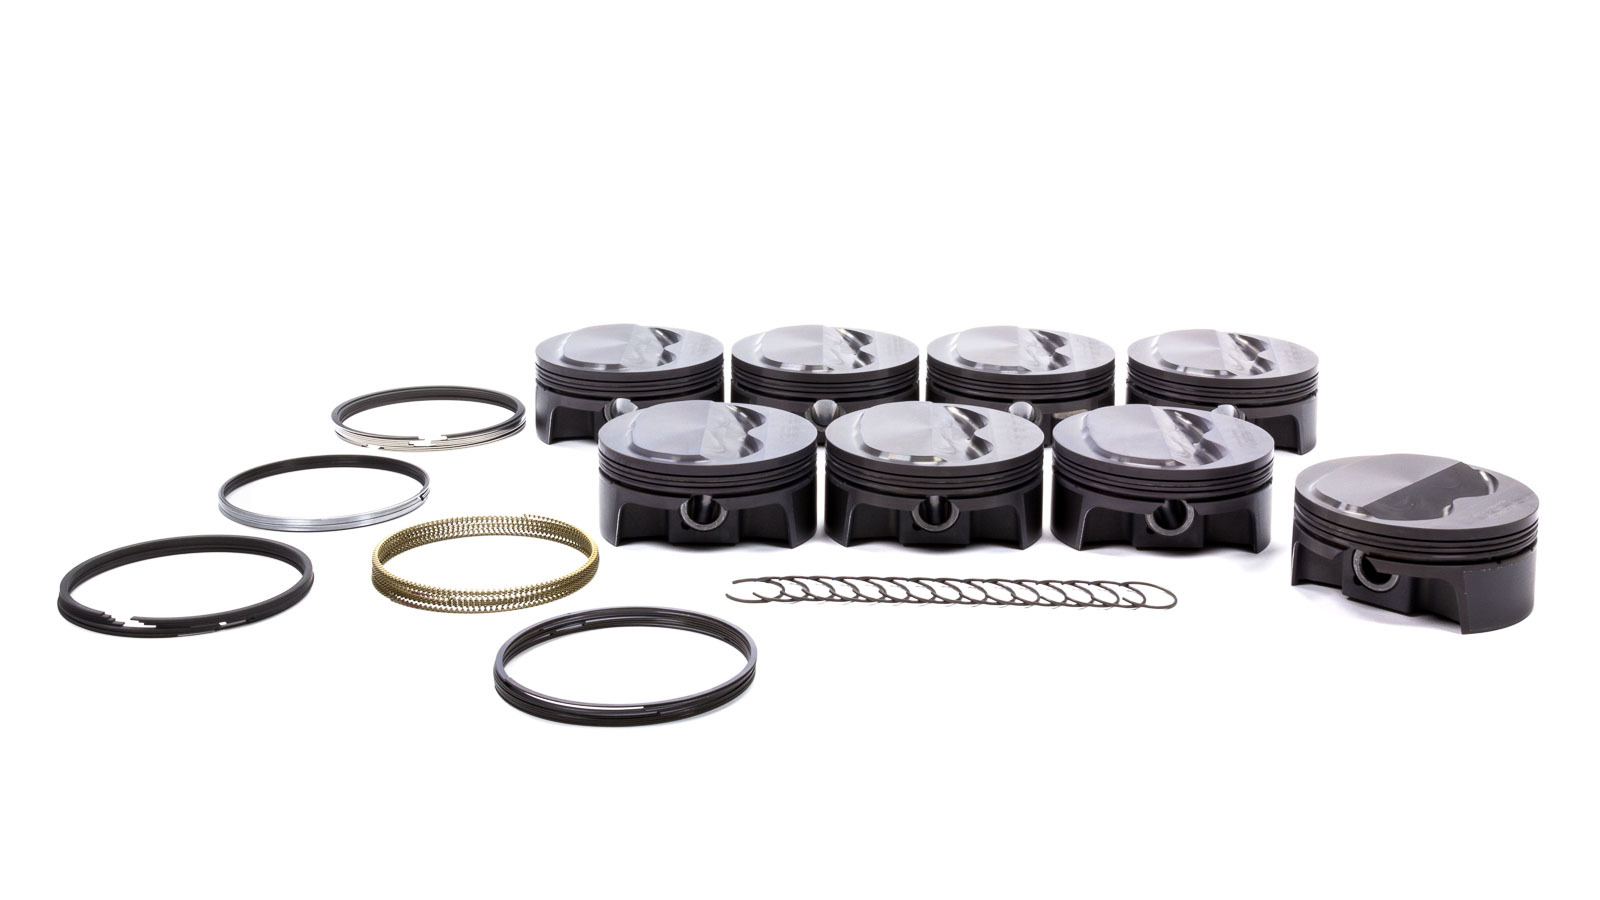 Mahle Pistons 930208655 Piston and Ring, PowerPak, Forged, 4.155 in Bore, 1.0 x 1.0 x 2.0 mm Ring Groove, Plus 4.00 cc, Small Block Chevy, Kit